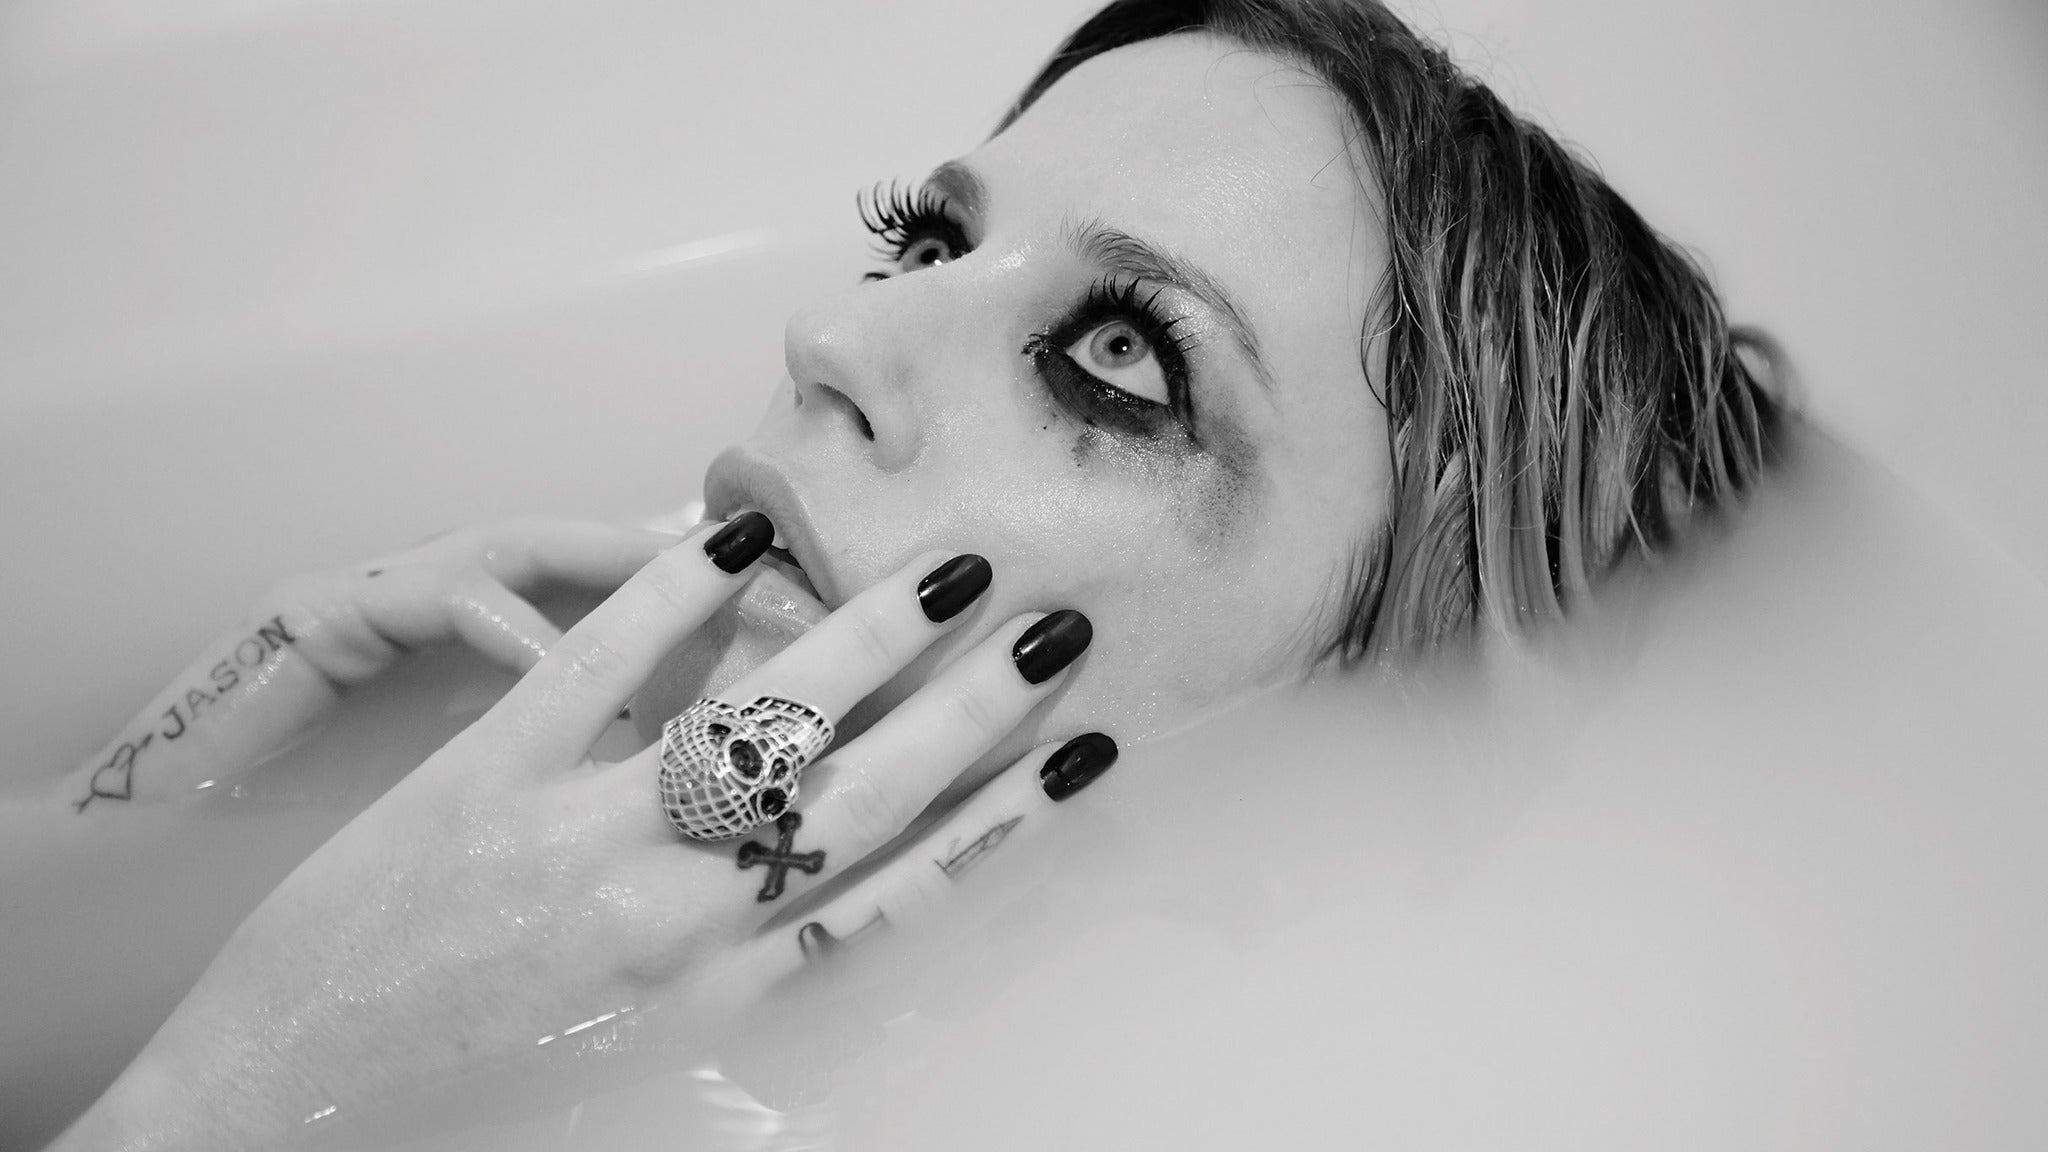 Gin Wigmore with special guest Kate Earl pre-sale password for early tickets in Detroit